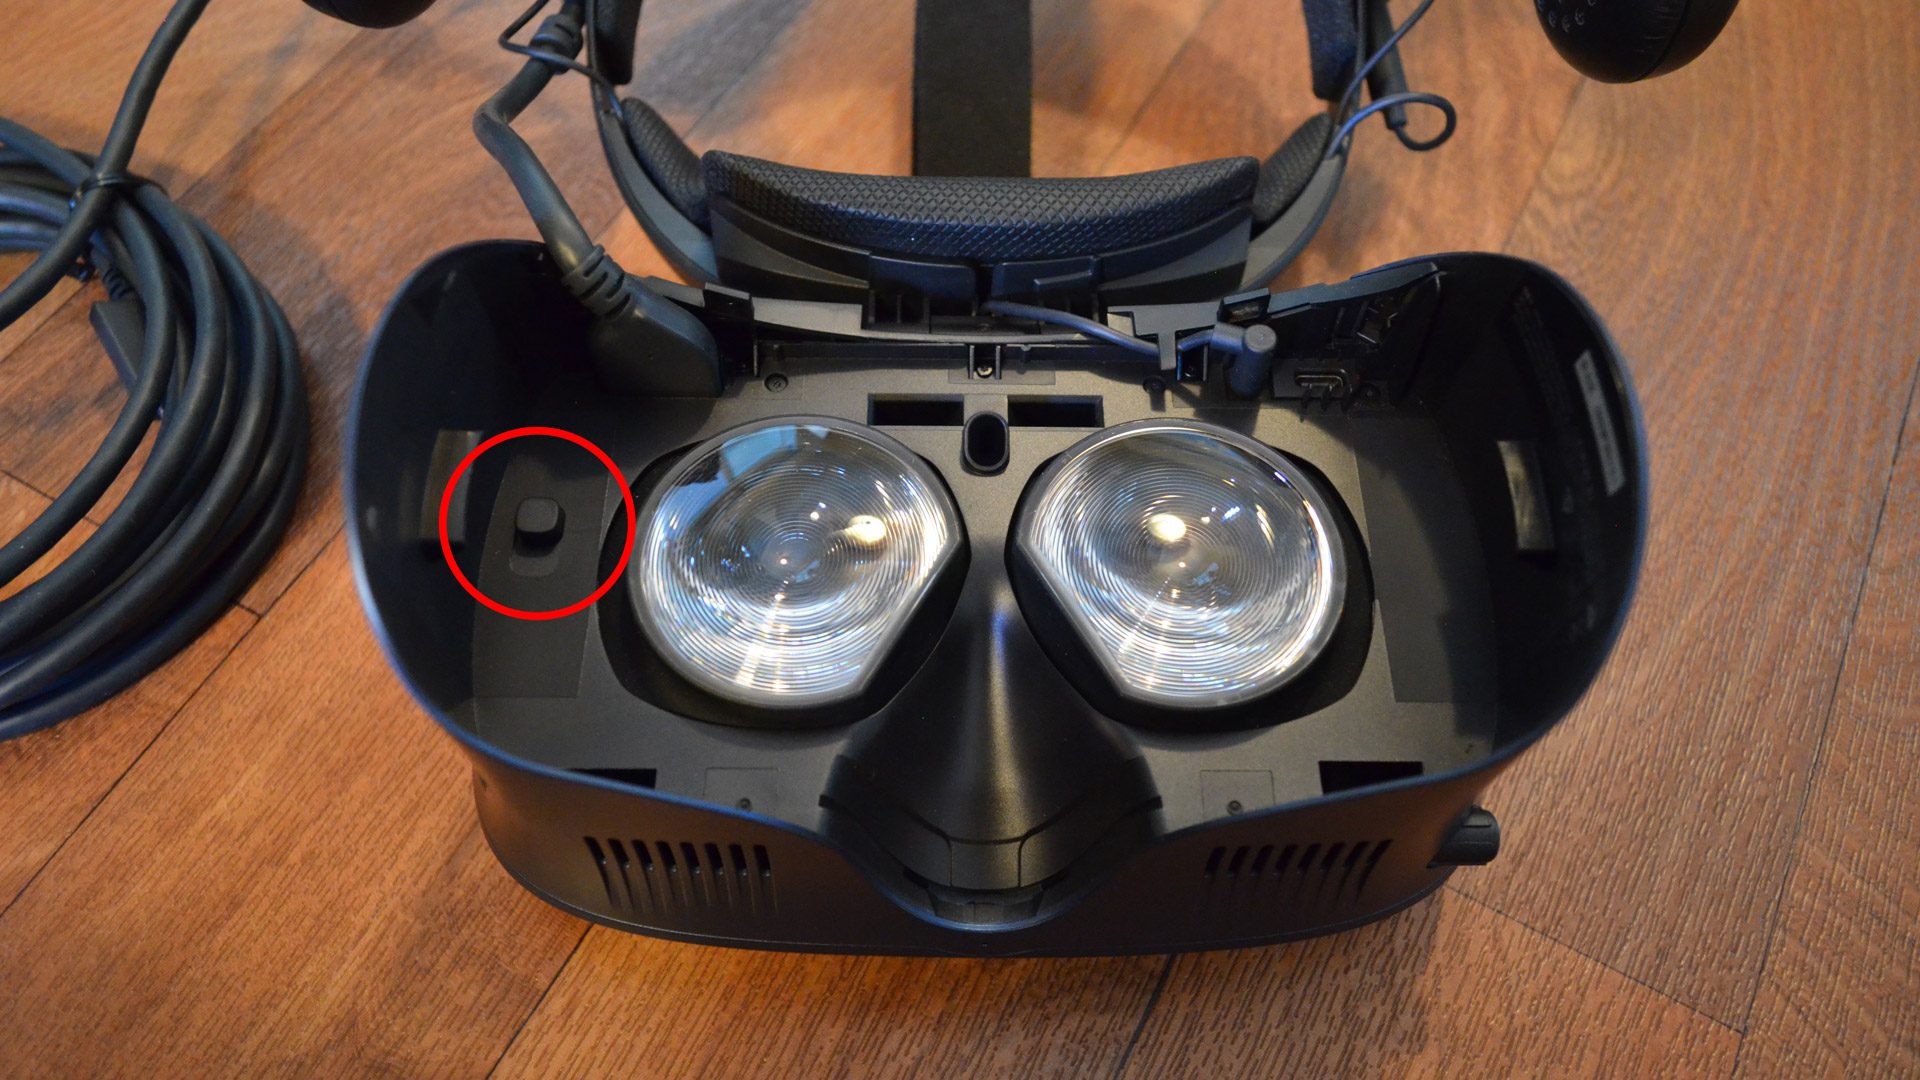 Vive Cosmos Elite & External Tracking Faceplate Review – Cosmos 